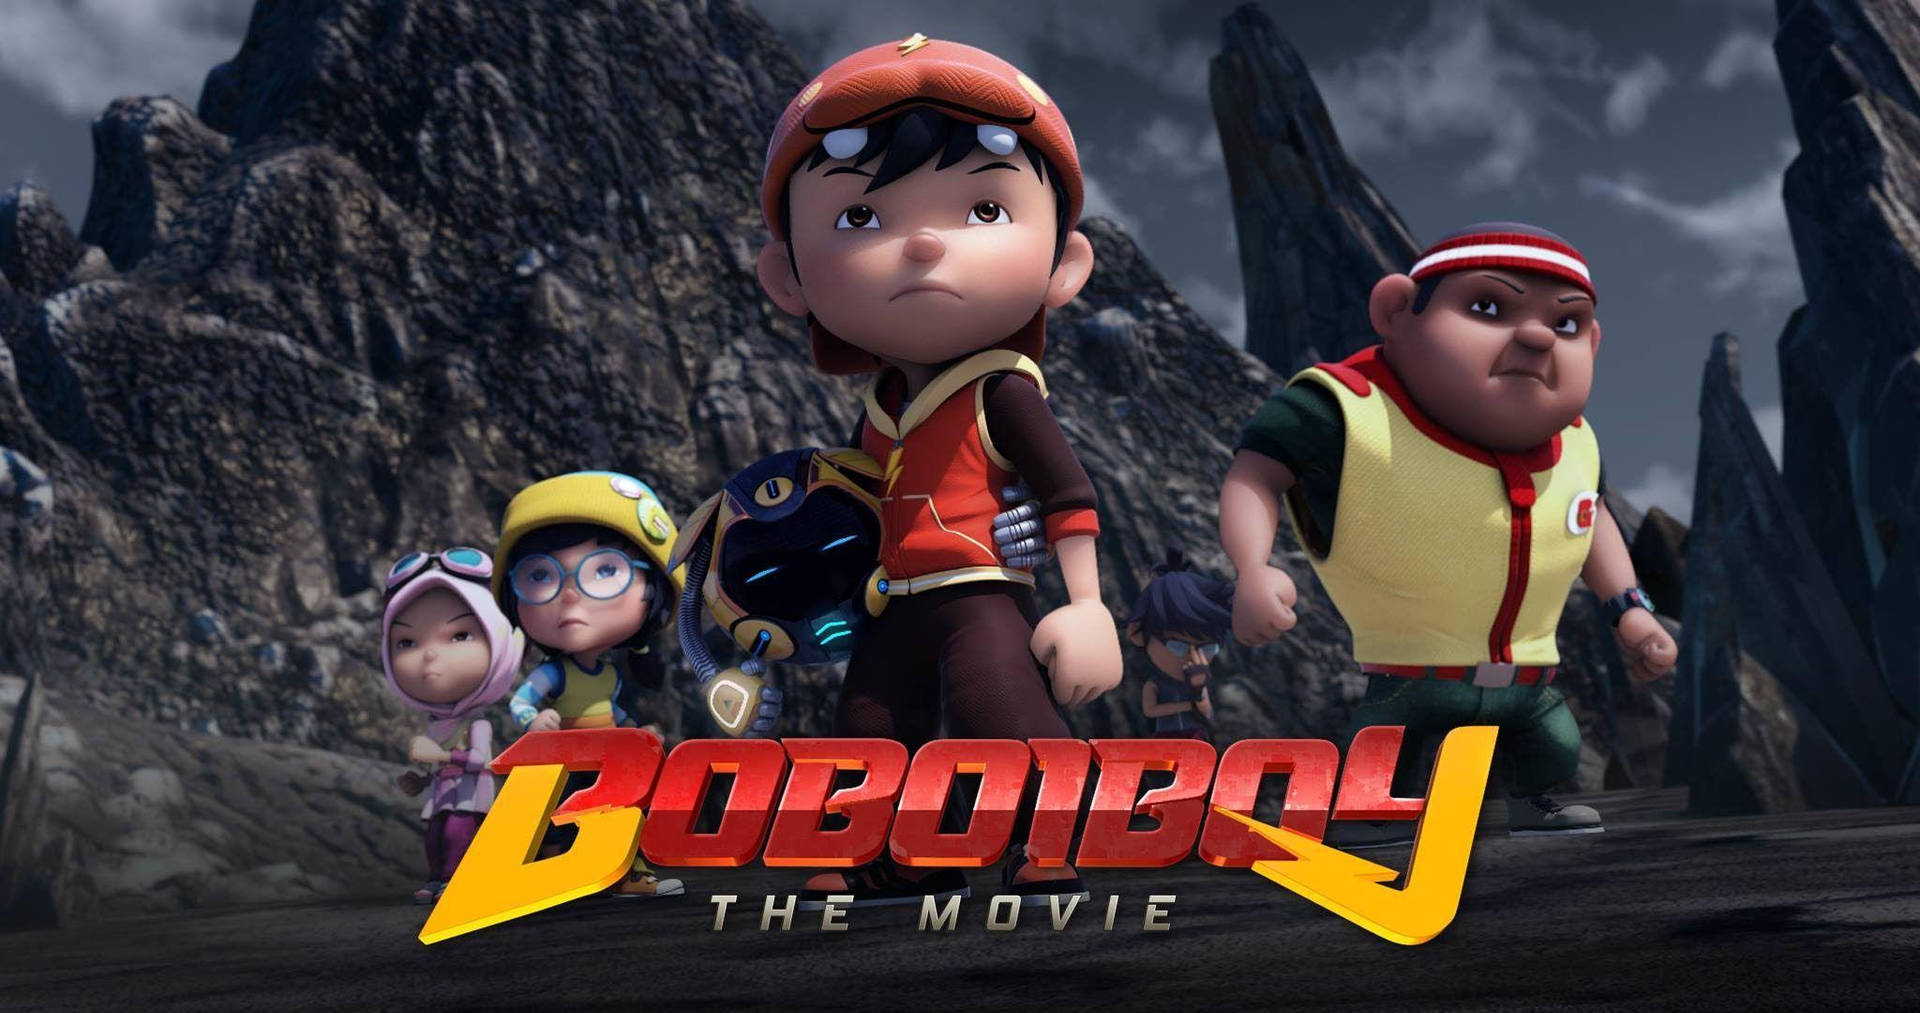 BoBoiBoy And Friends The Movie Poster Wallpaper